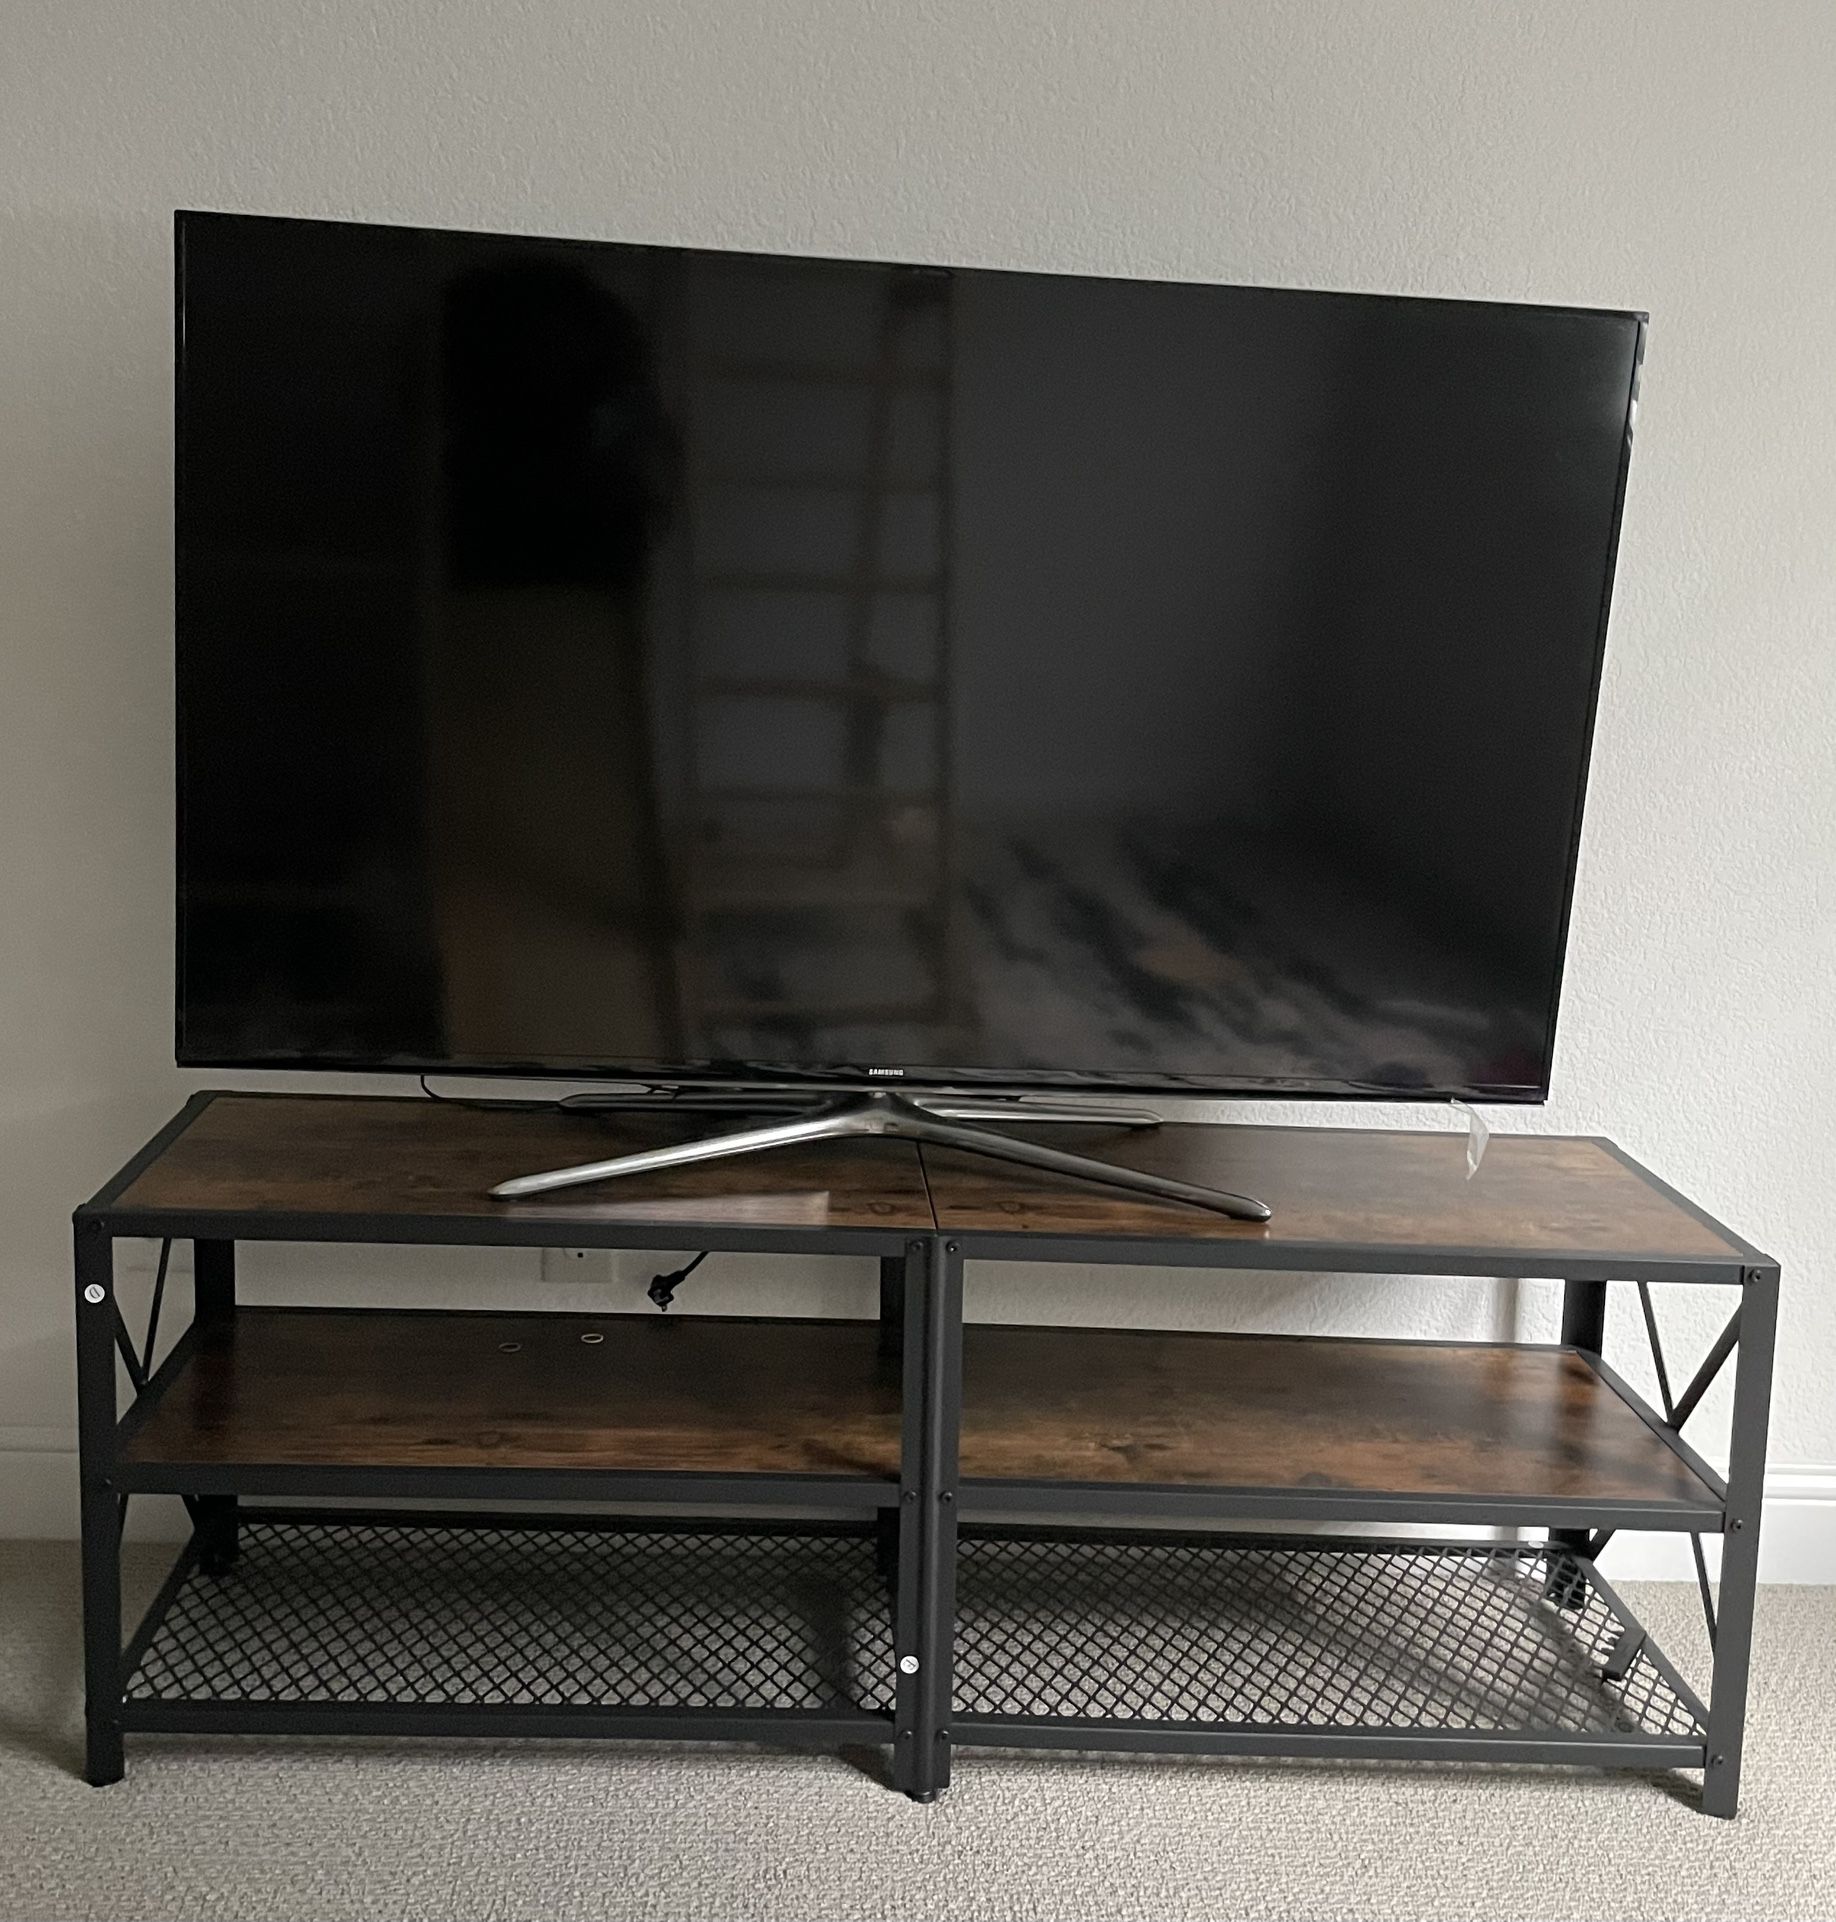 VASAGLE TV Stand, TV Console for TVs Up to 65 Inches, TV Table, 55.1 Inches Width, TV Cabinet with Storage Shelves, Steel Frame